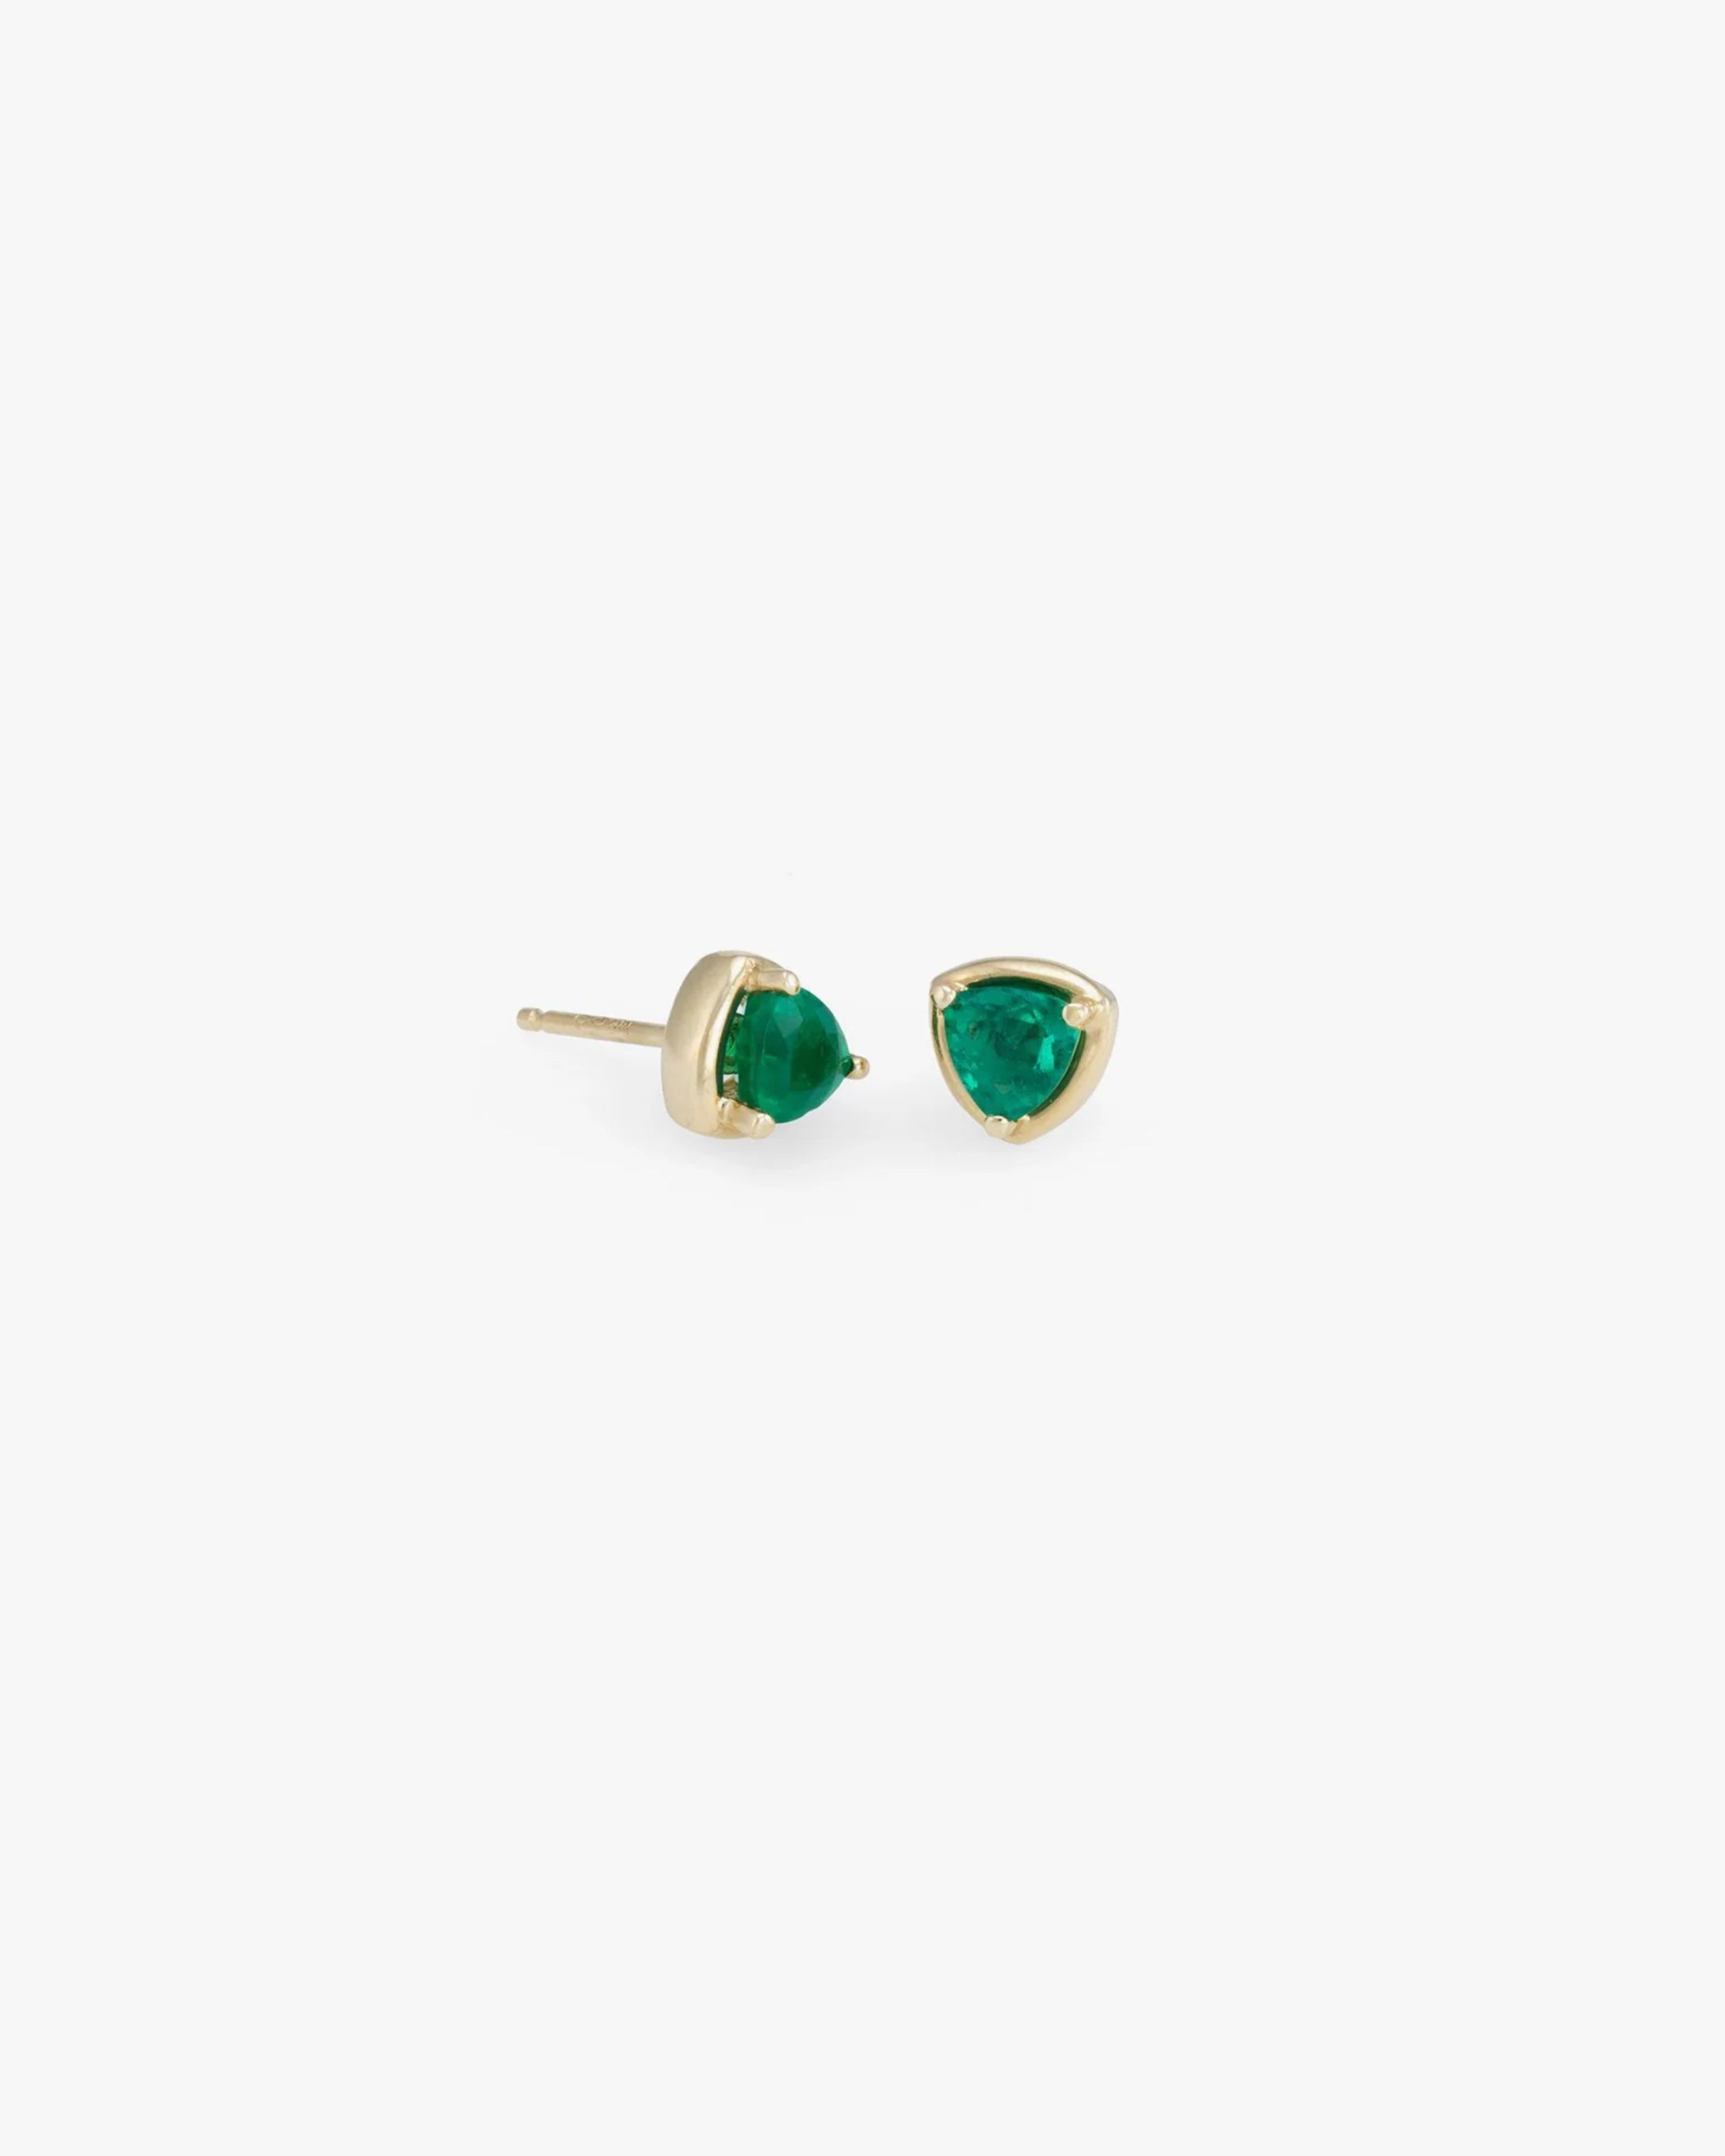 Prism Studs in 14K Yellow Gold / Emerald